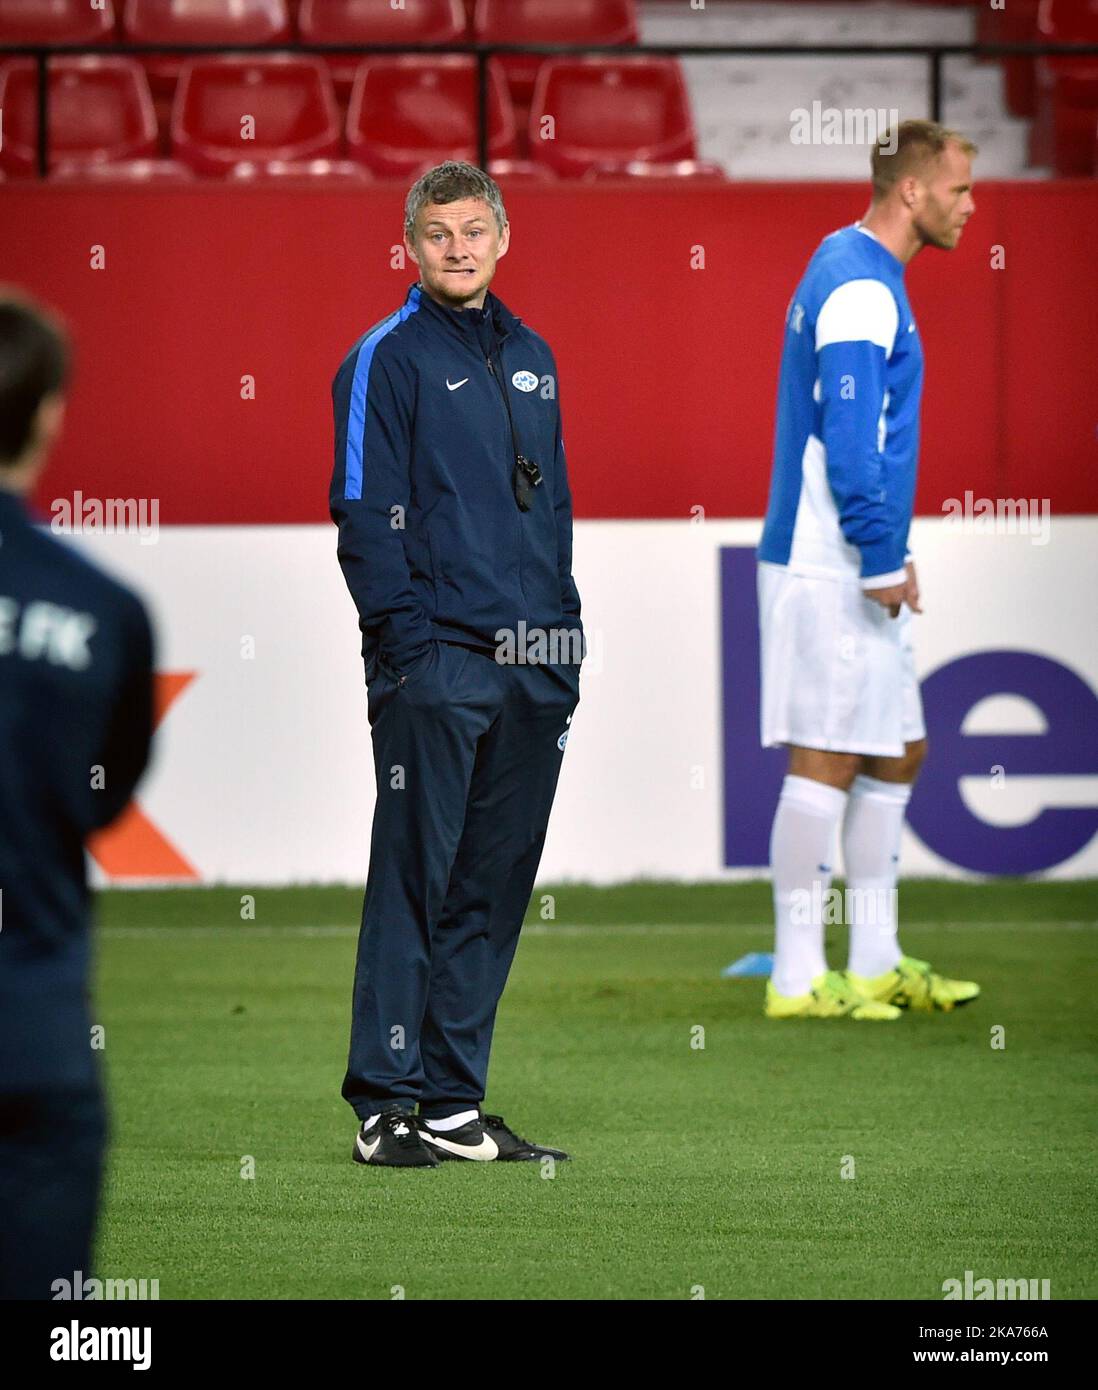 Europa League soccer 16 split final. Molde meets Seville in the first match away. The return camp goes in Molde next week. Here during the evening's training with trainer Ole Gunnar Solskjaer. In the background right Eidur Gudjohnsen. Stock Photo